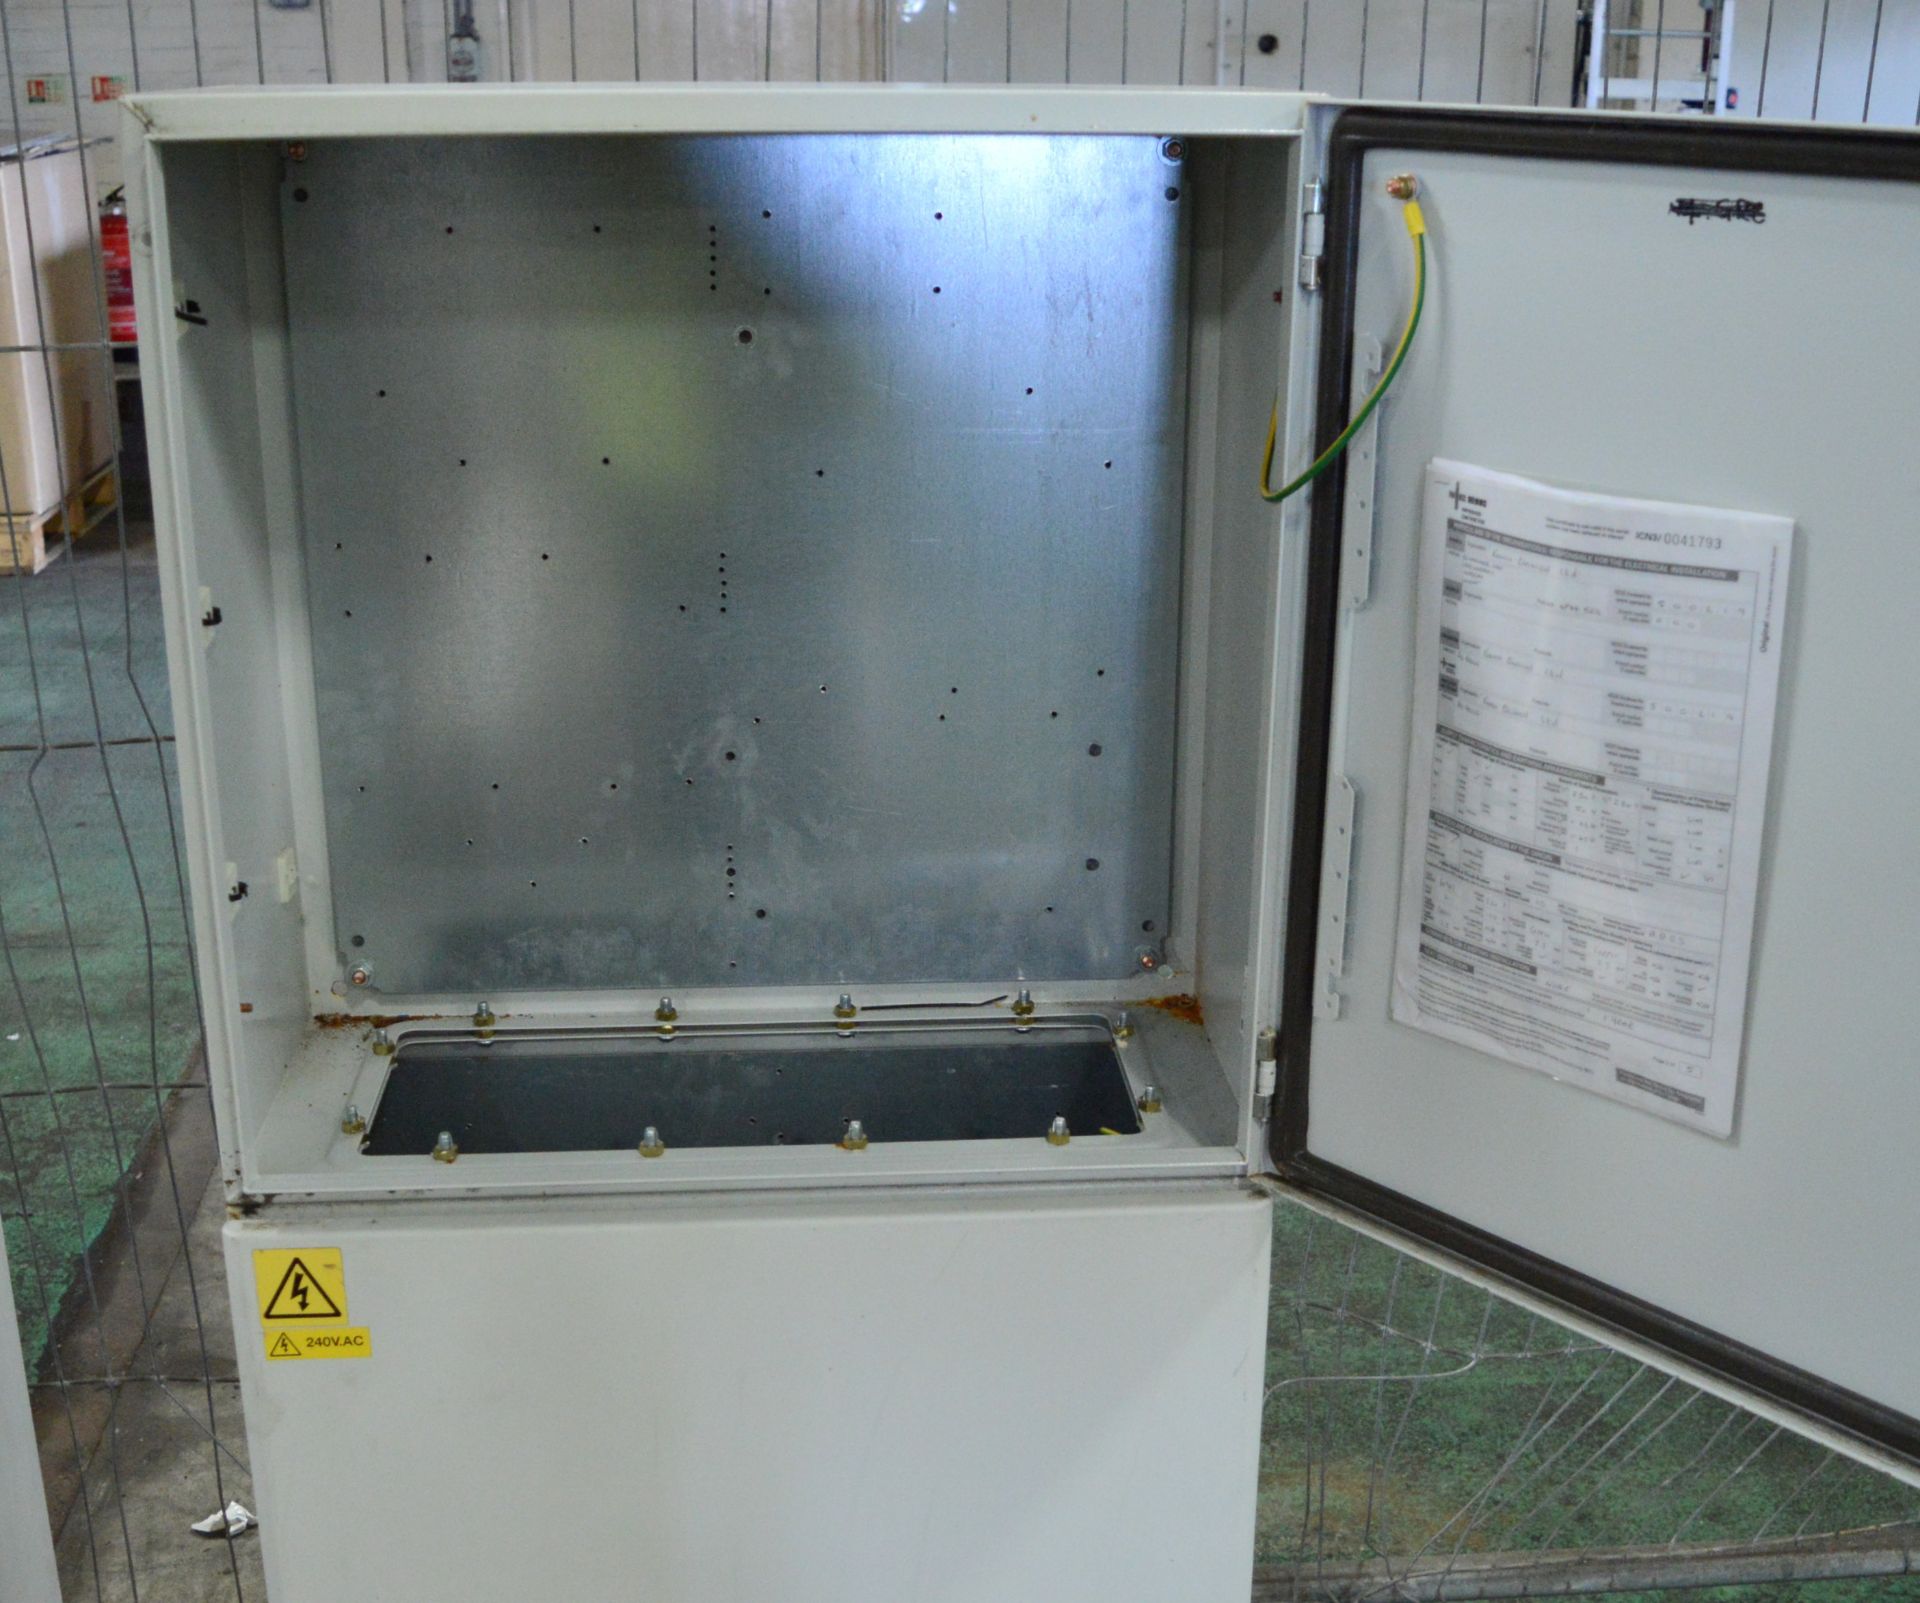 2x Coupled Schneider NSYS3D6630P Steel Enclosures - Each 600 x 600 x 300mm. - Image 2 of 2